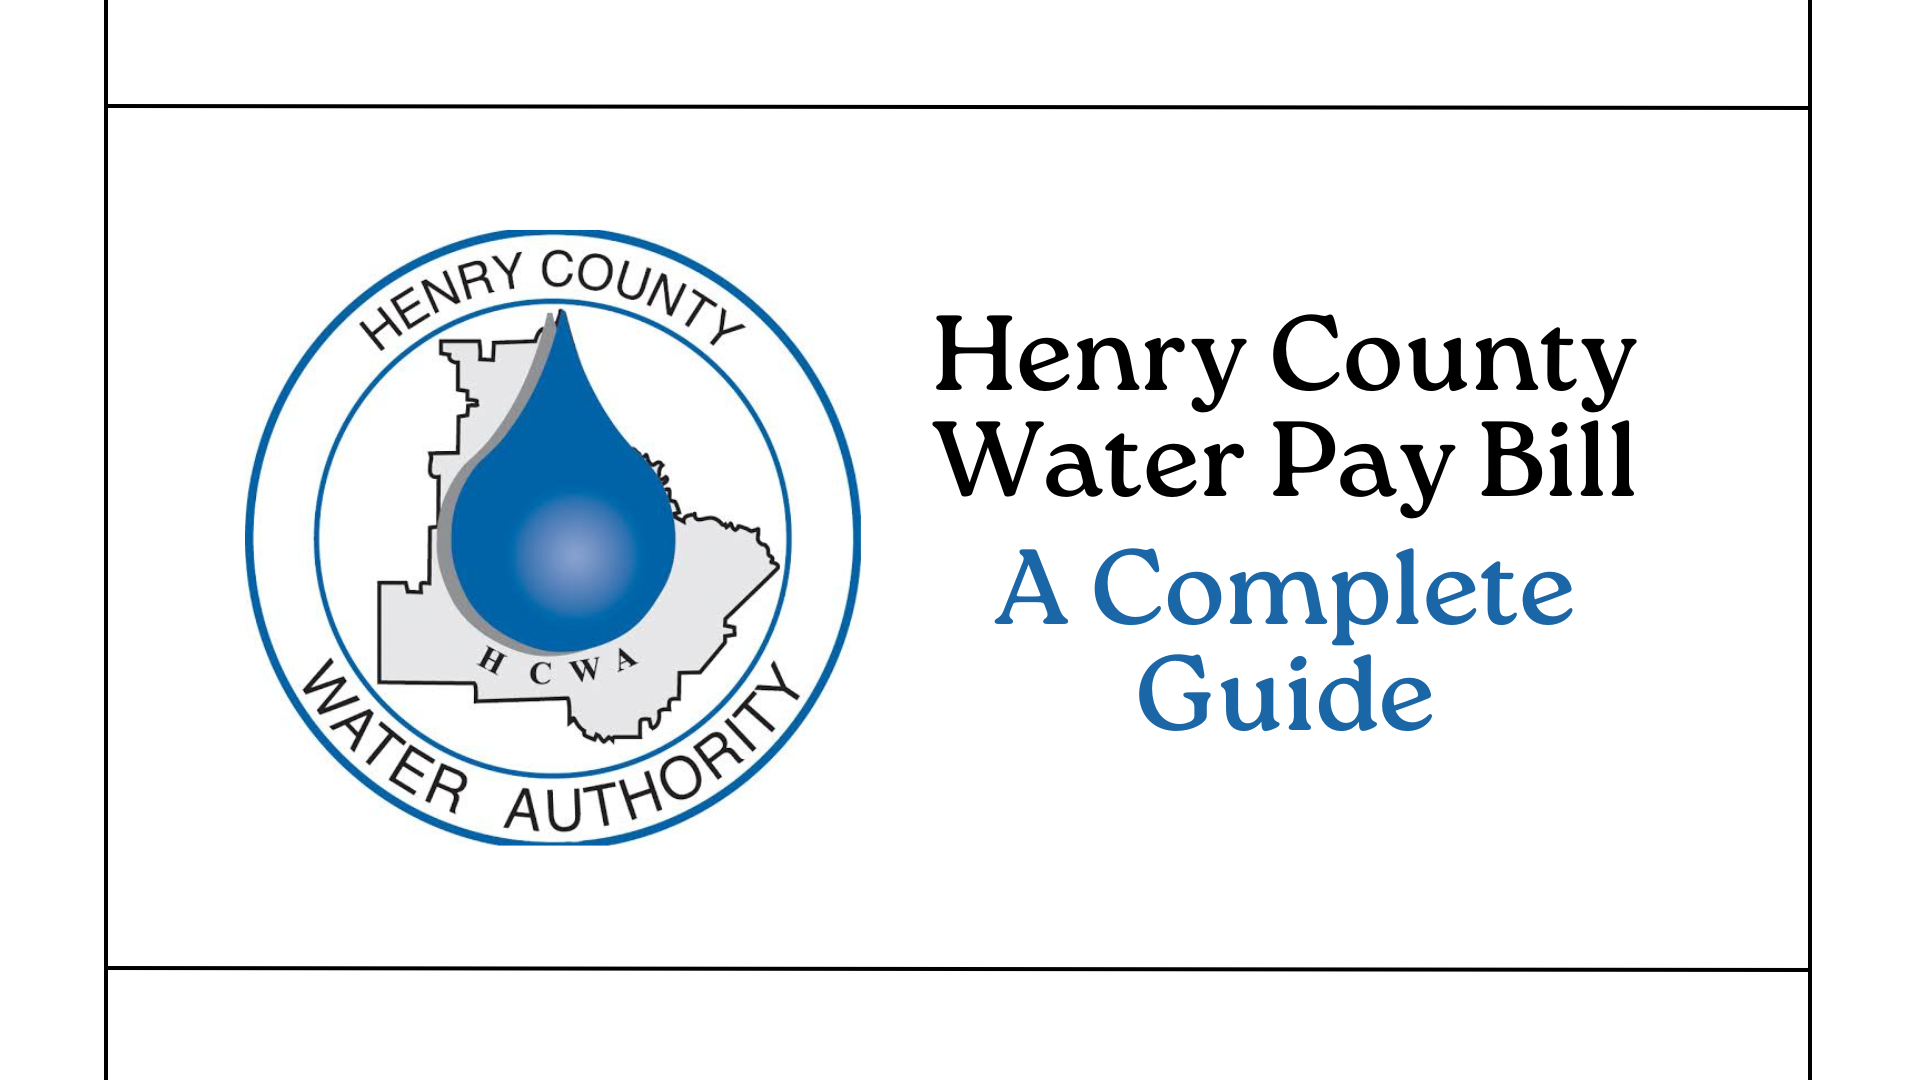 Henry County Water Pay Bill